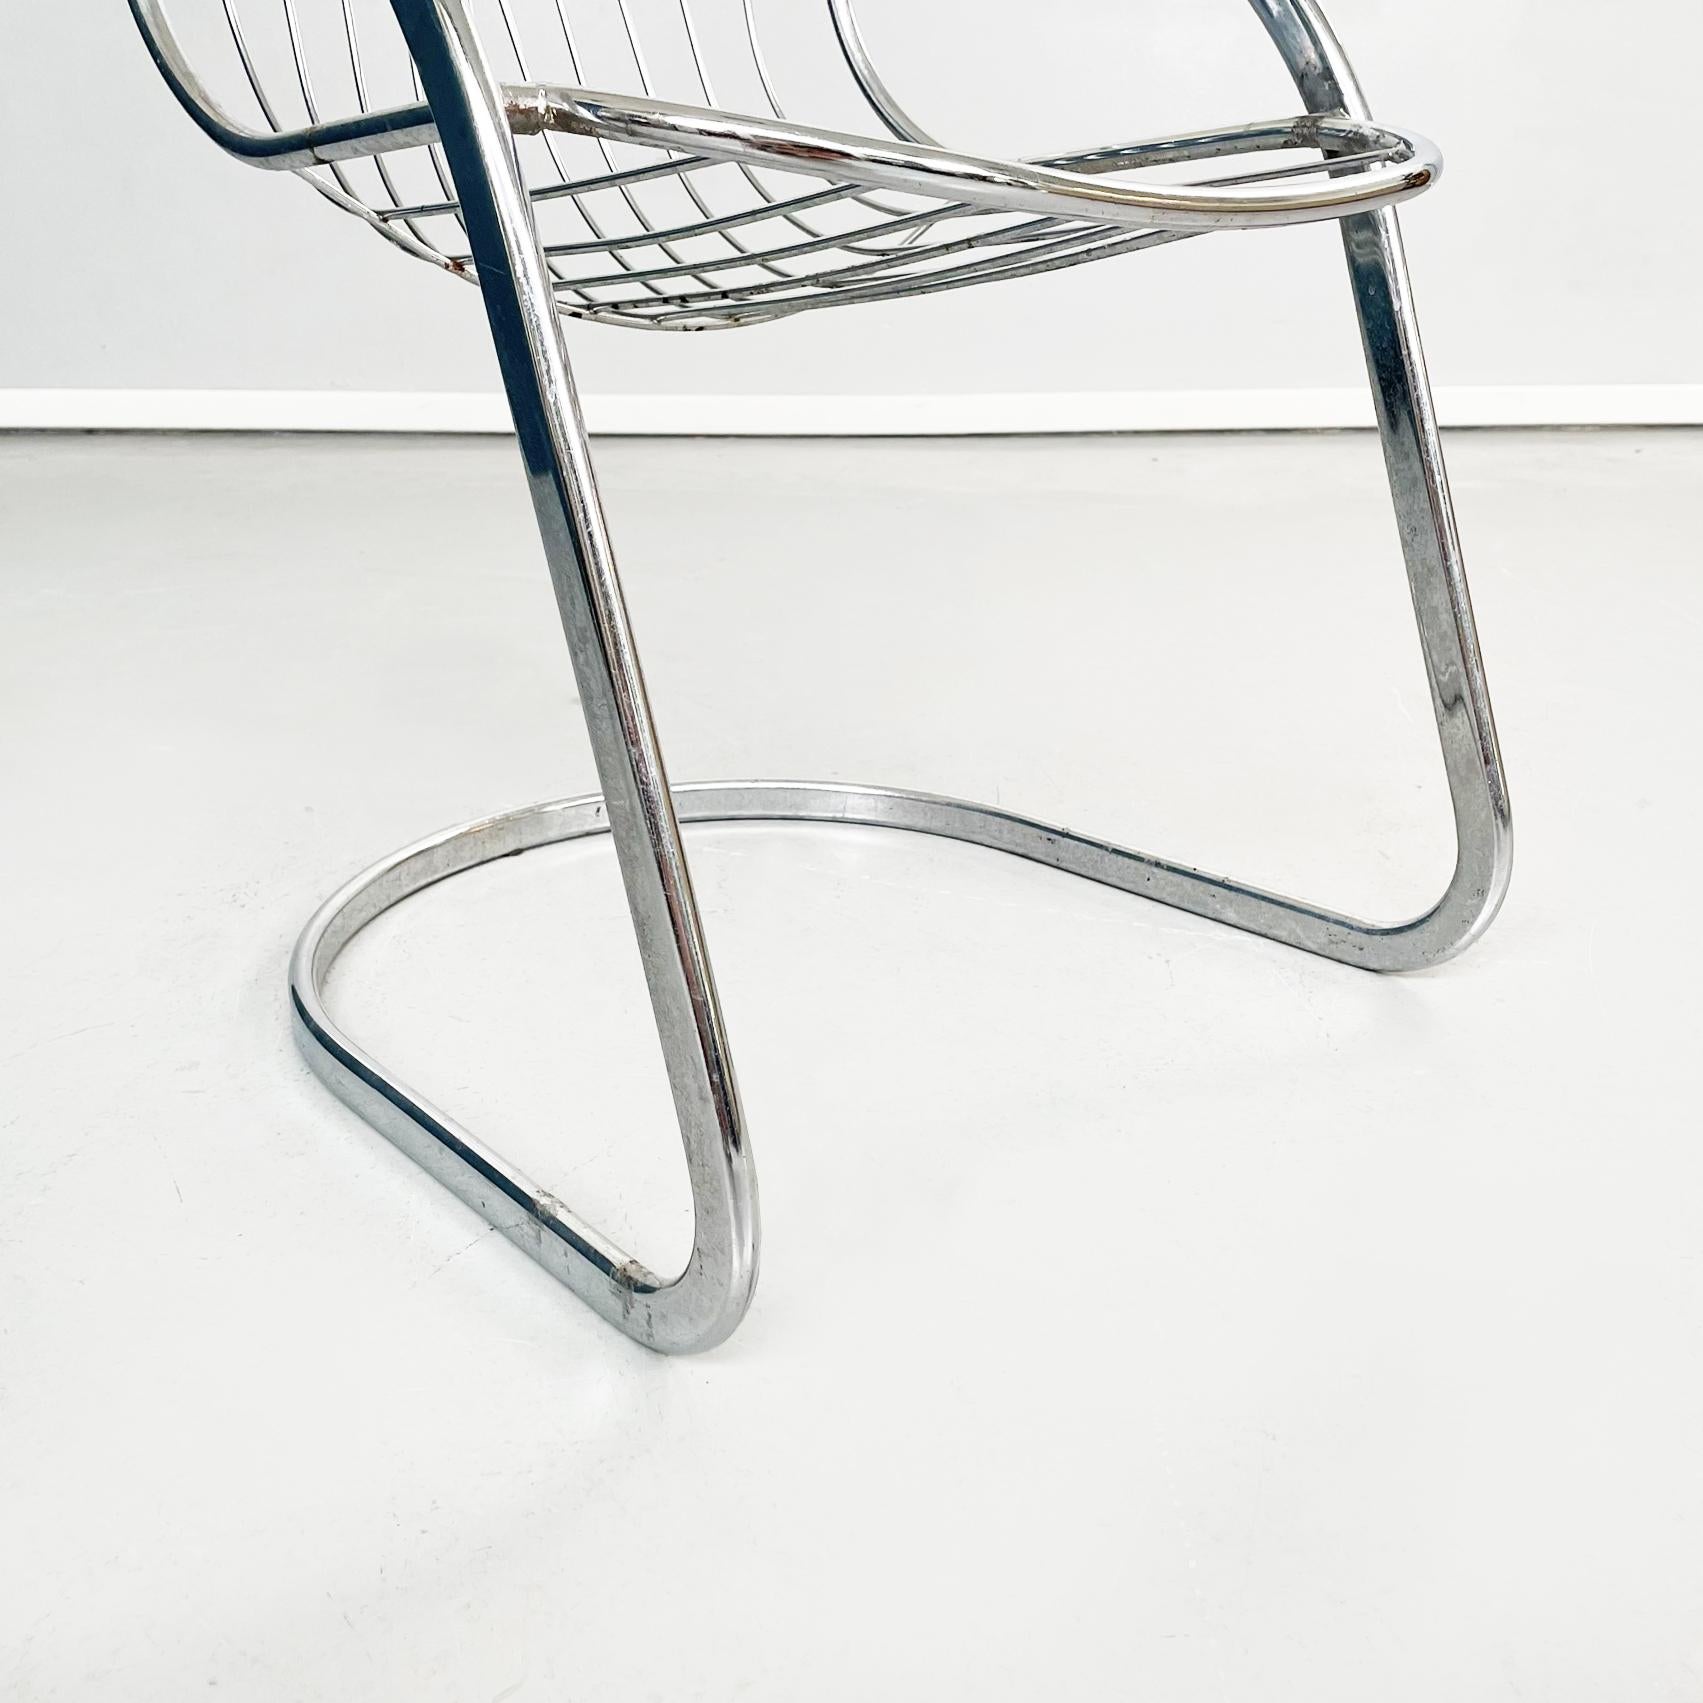 Italian Space Age Chair in Curved Chromed Steel, 1970s For Sale 7